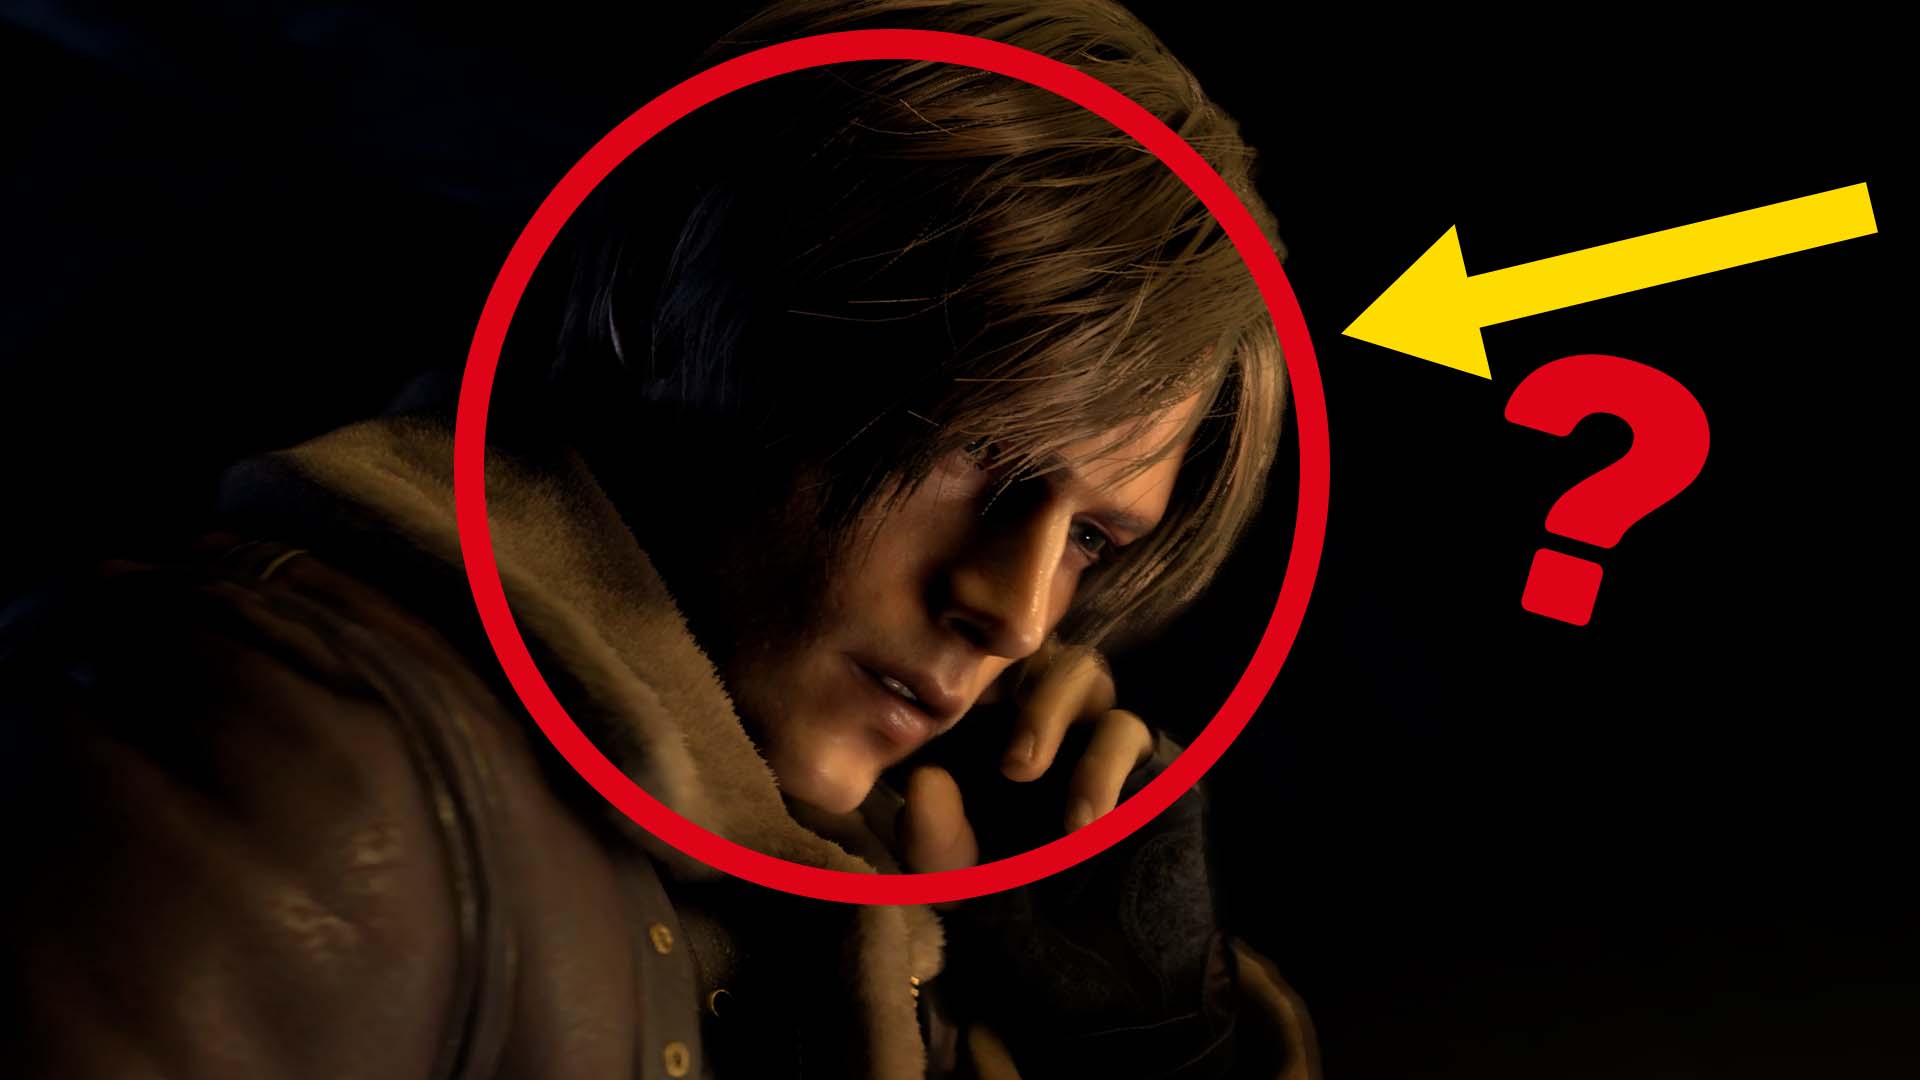 Leon from Resident Evil 4, with a big red circle around his face and a yellow arrow pointing at it. You know. Like YouTube thumbnails?